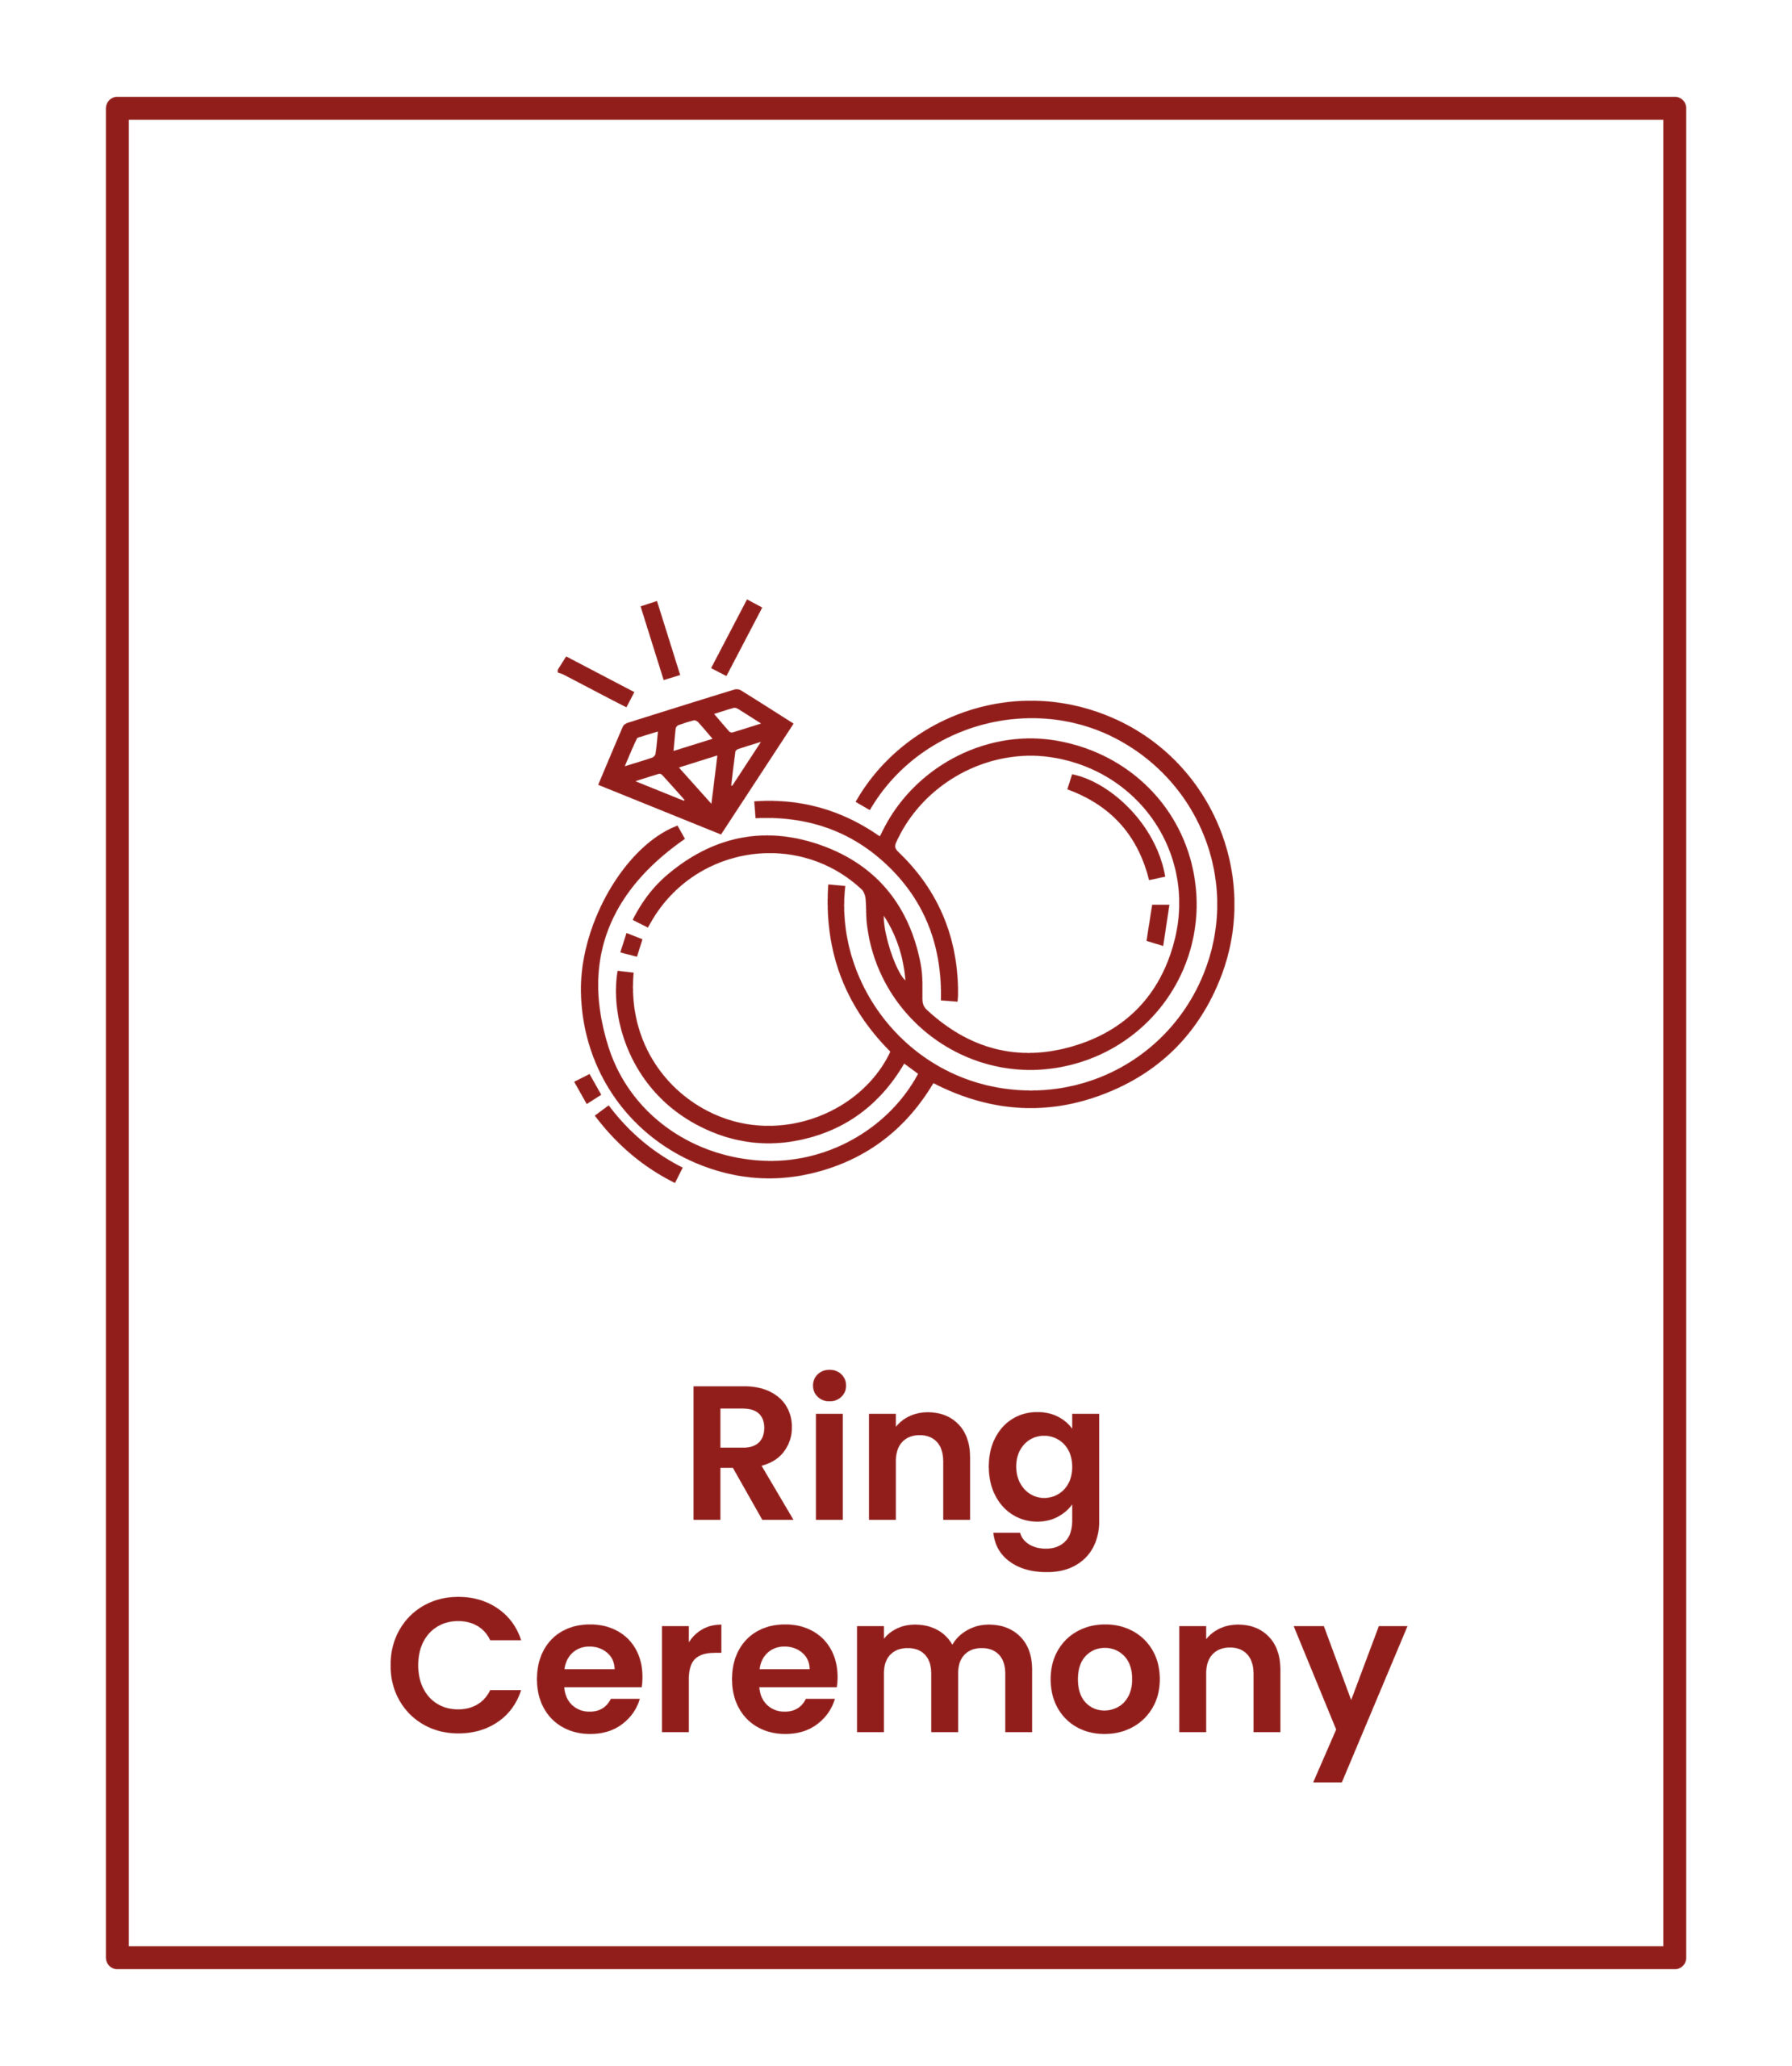 Ring ceremony is 'rite of passage' for Class of '21 – The Pep